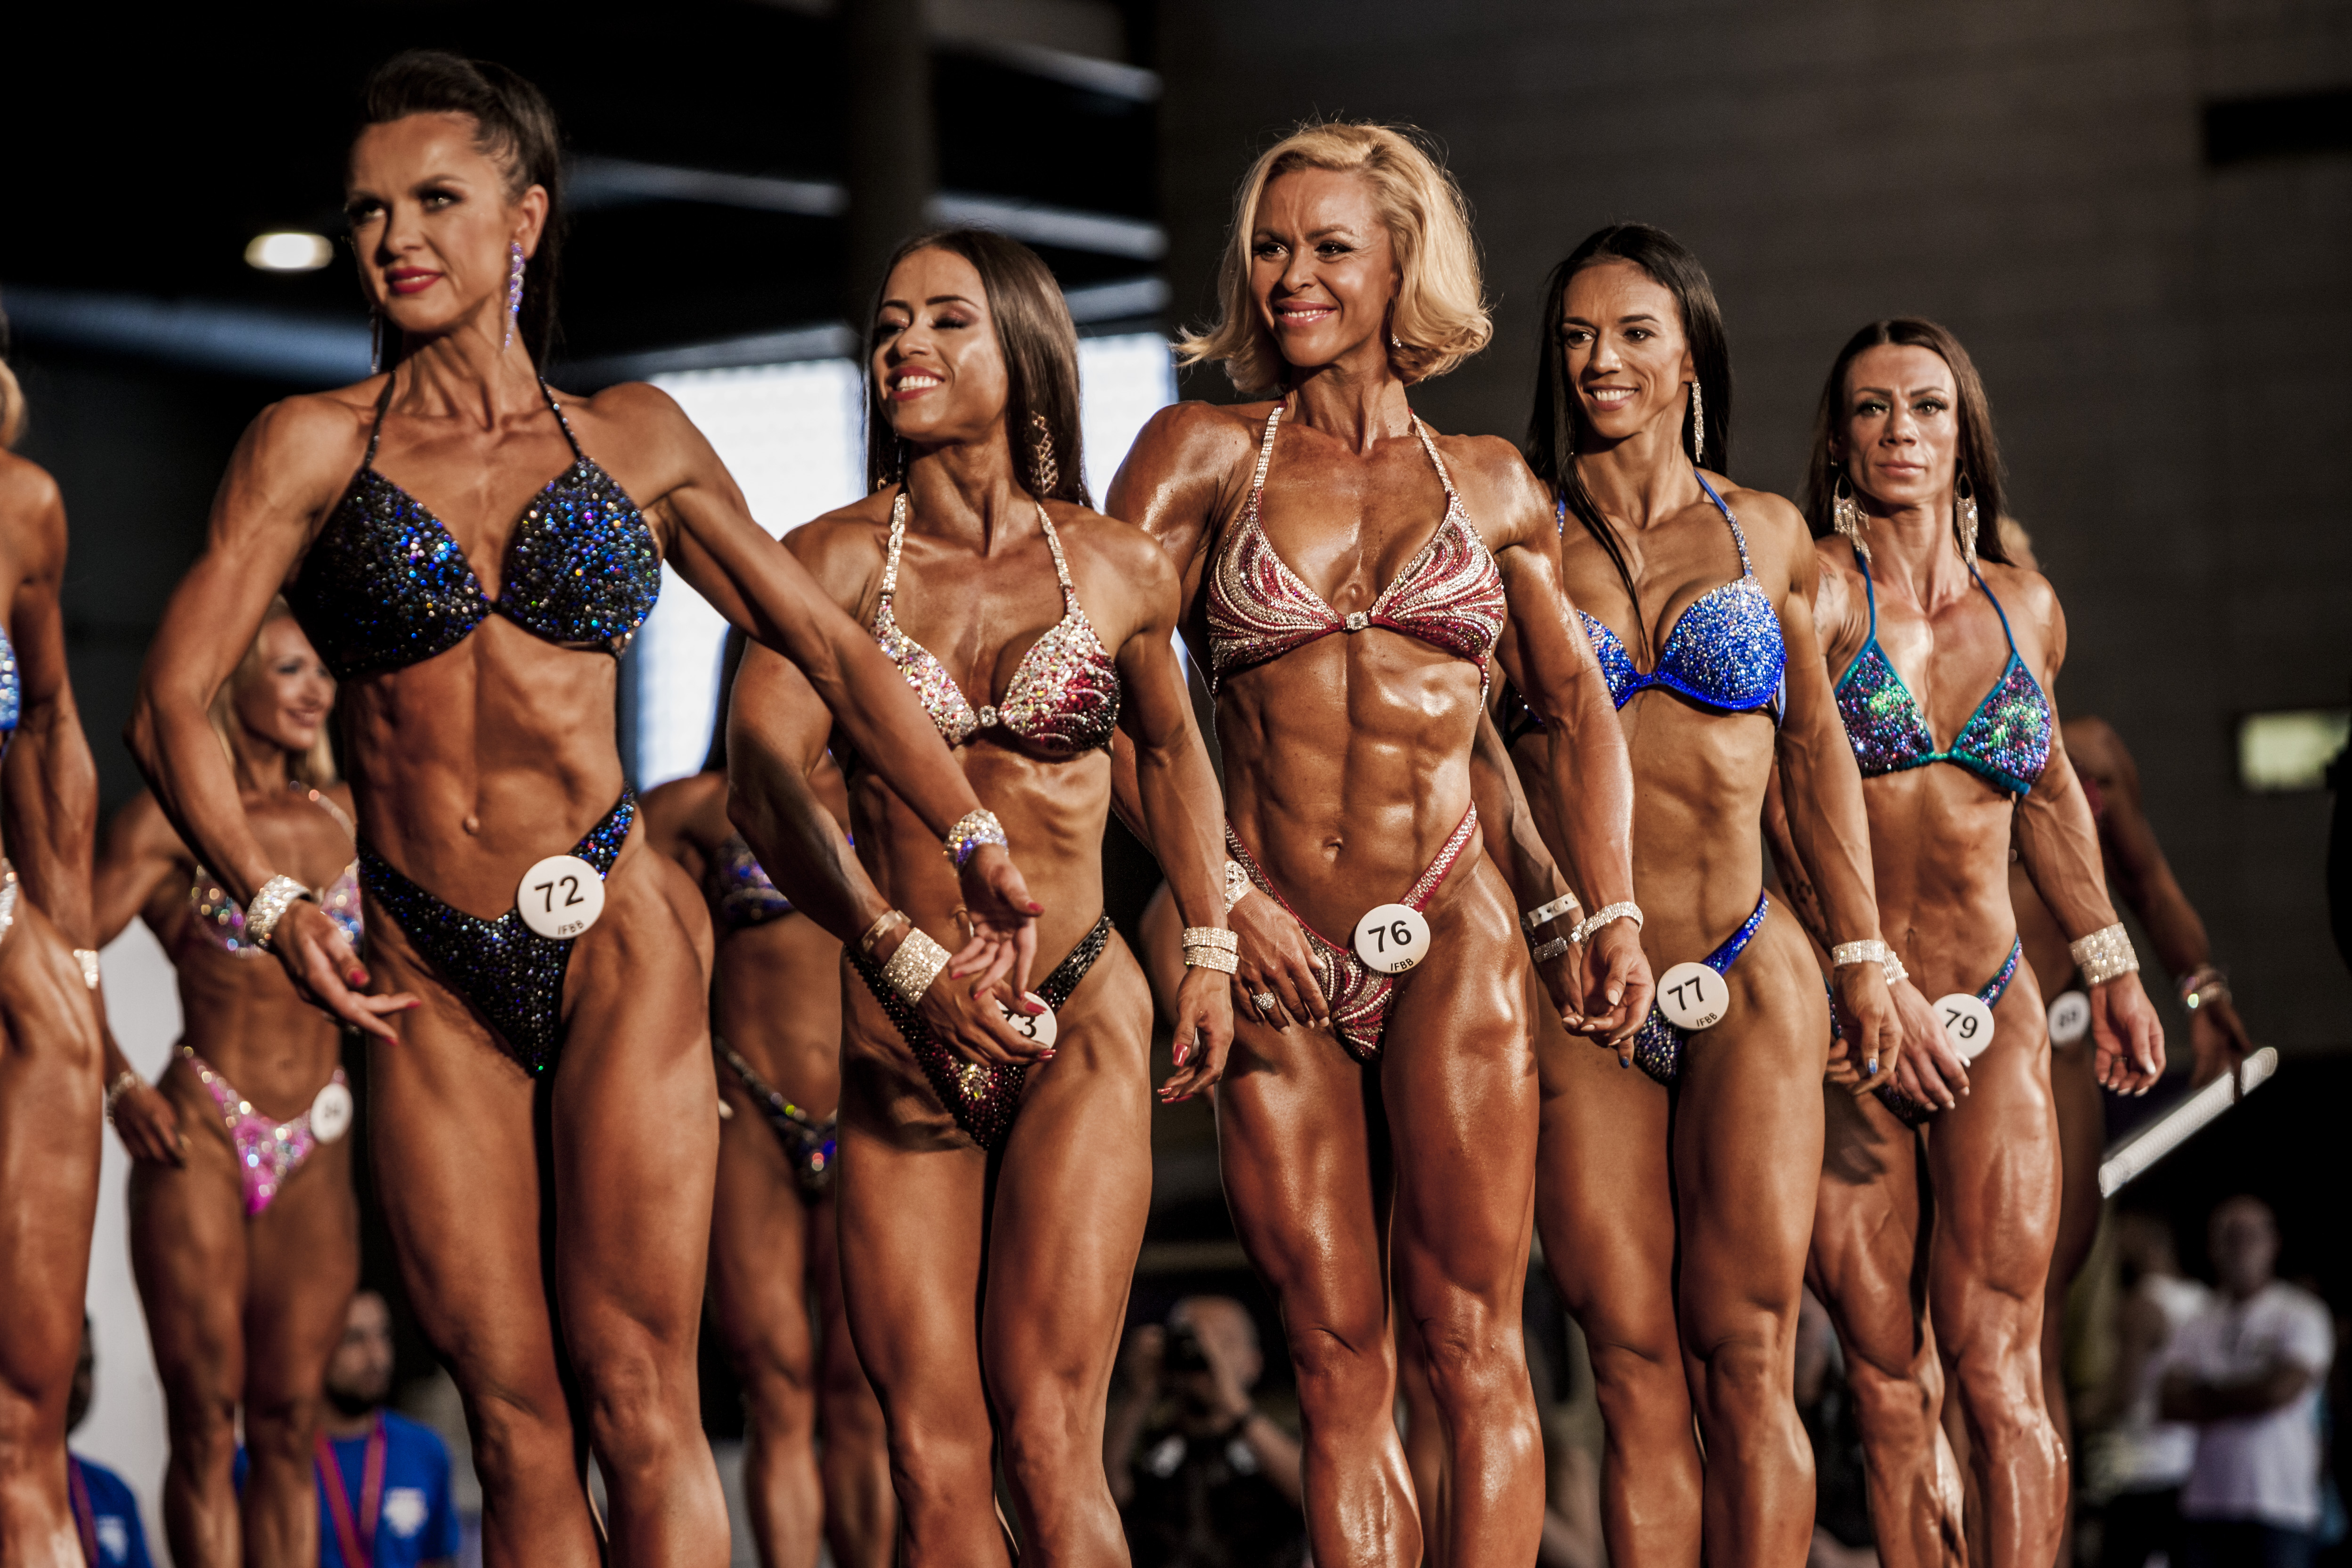 The Bodybuilding Wellness Division is All About the Lower Body